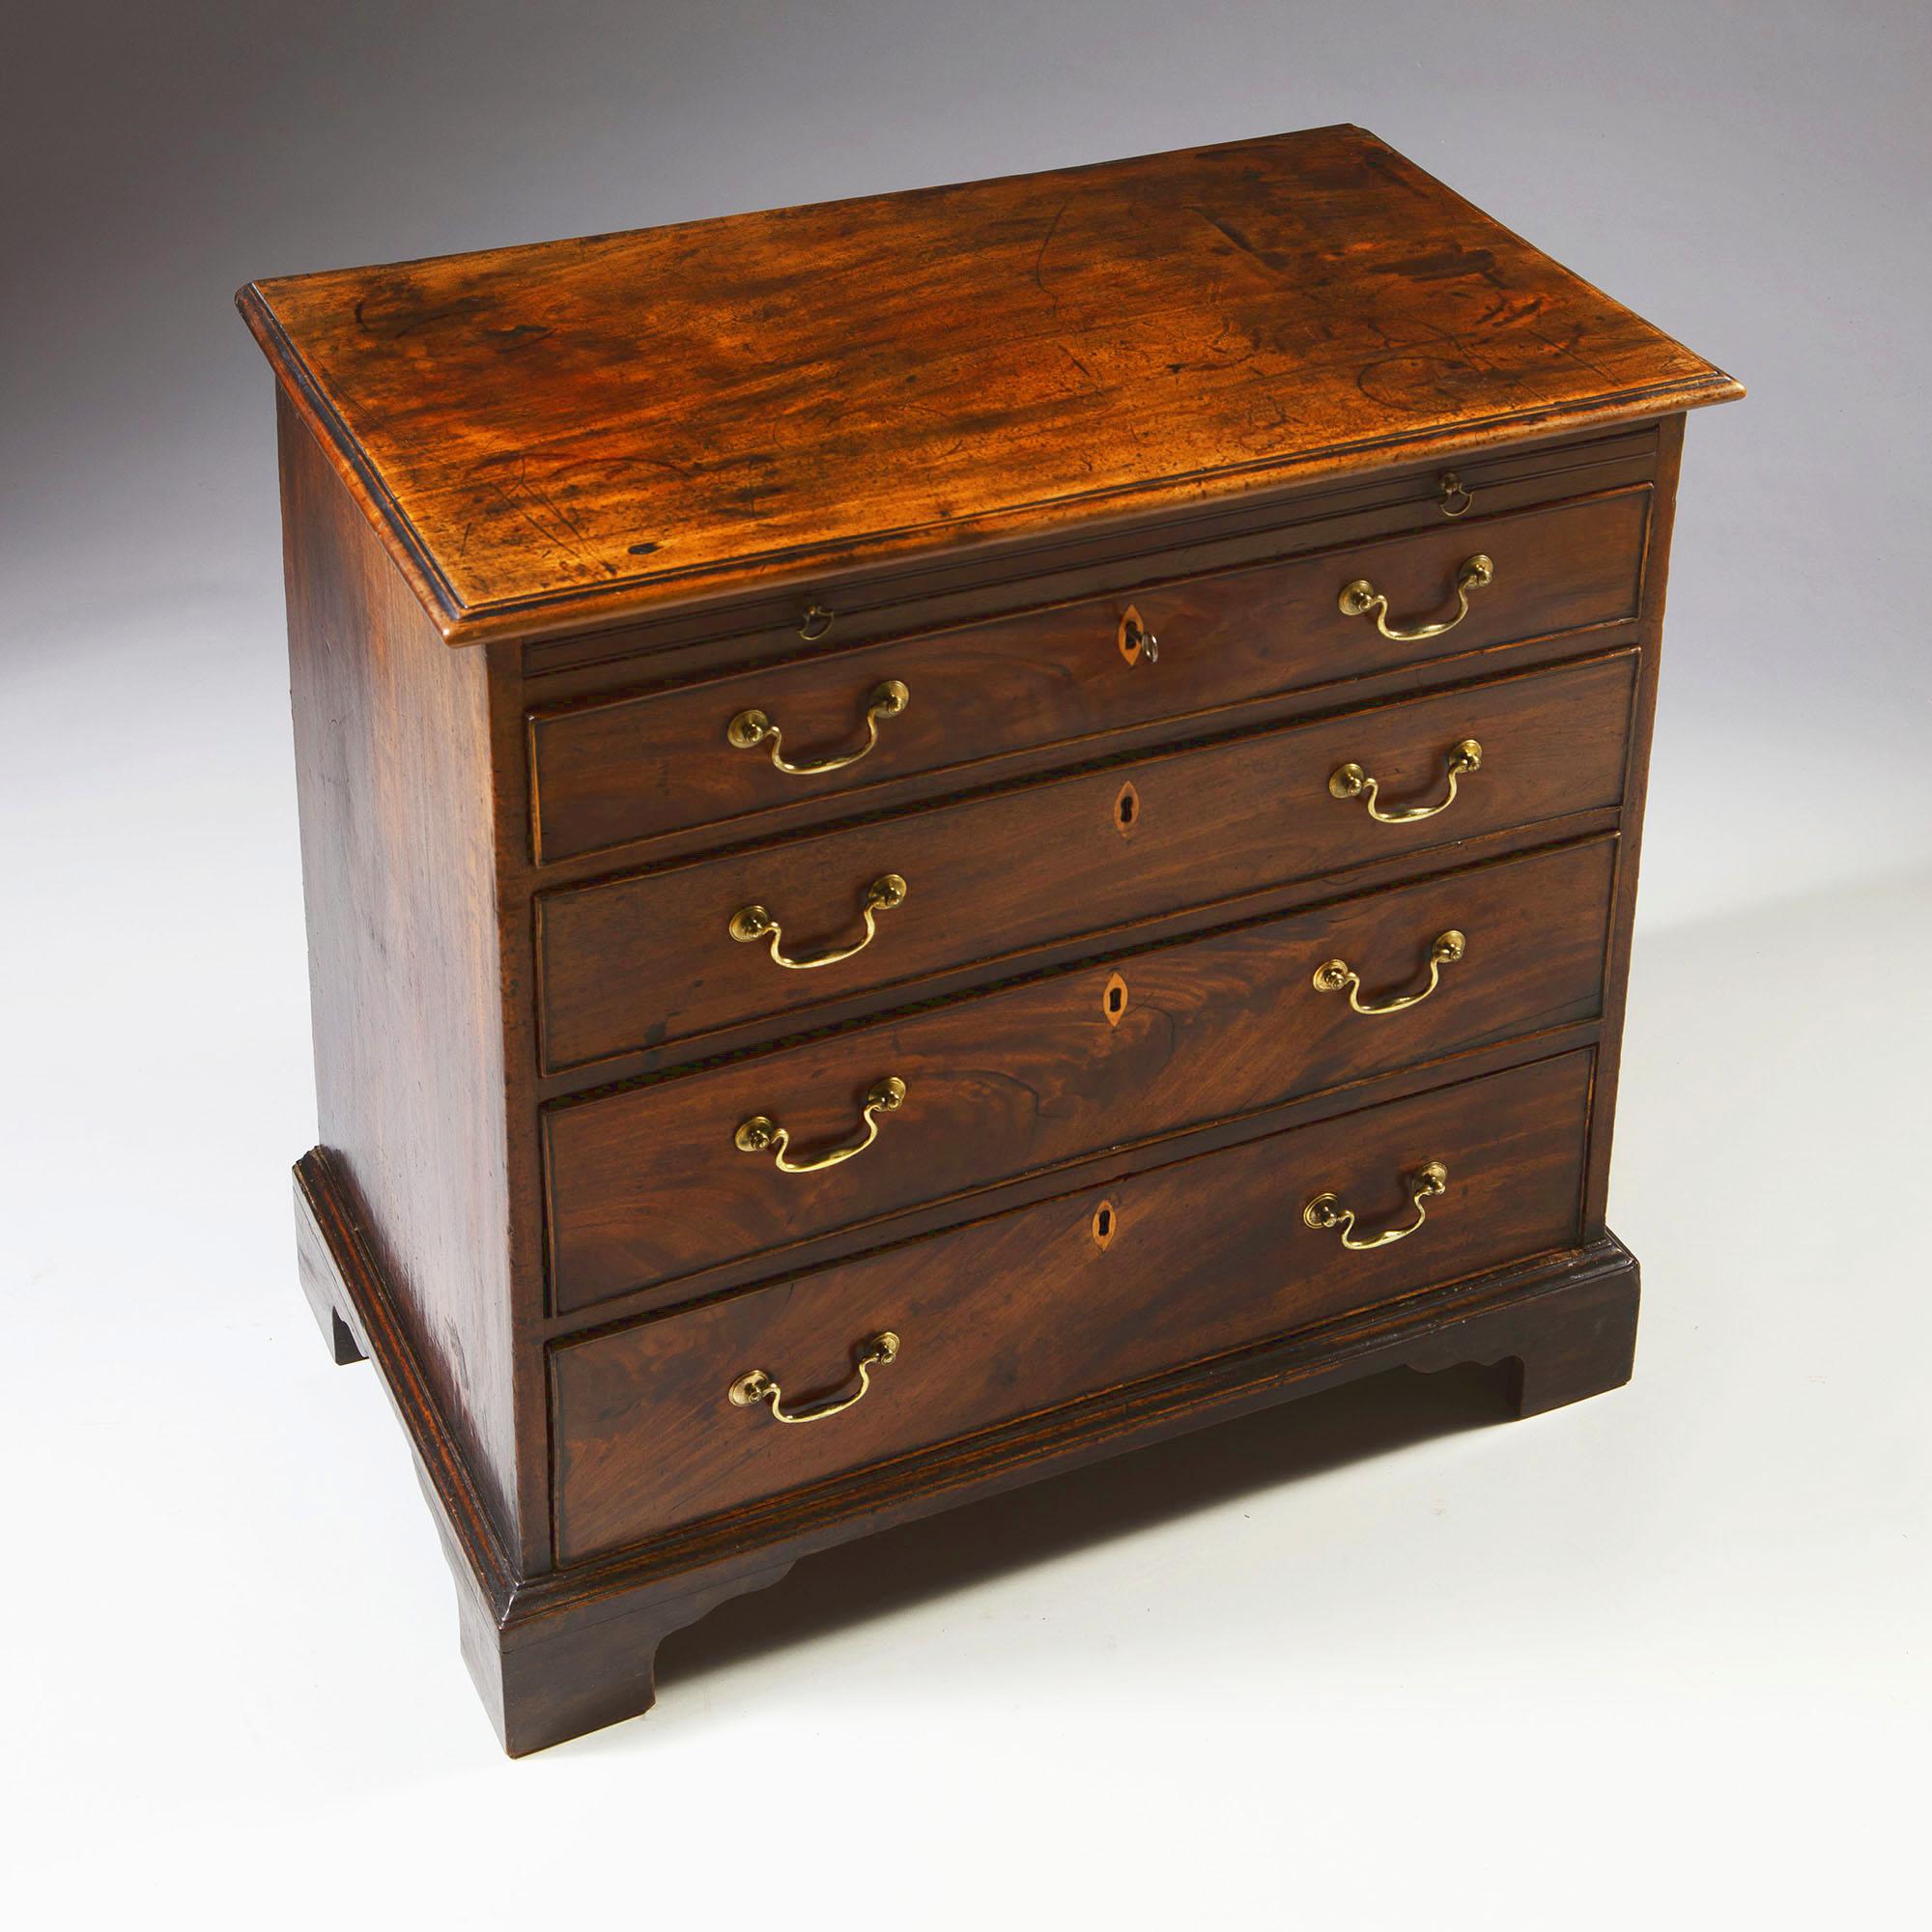 English Mid-18th Century Chippendale Period Mahogany Chest of Drawers